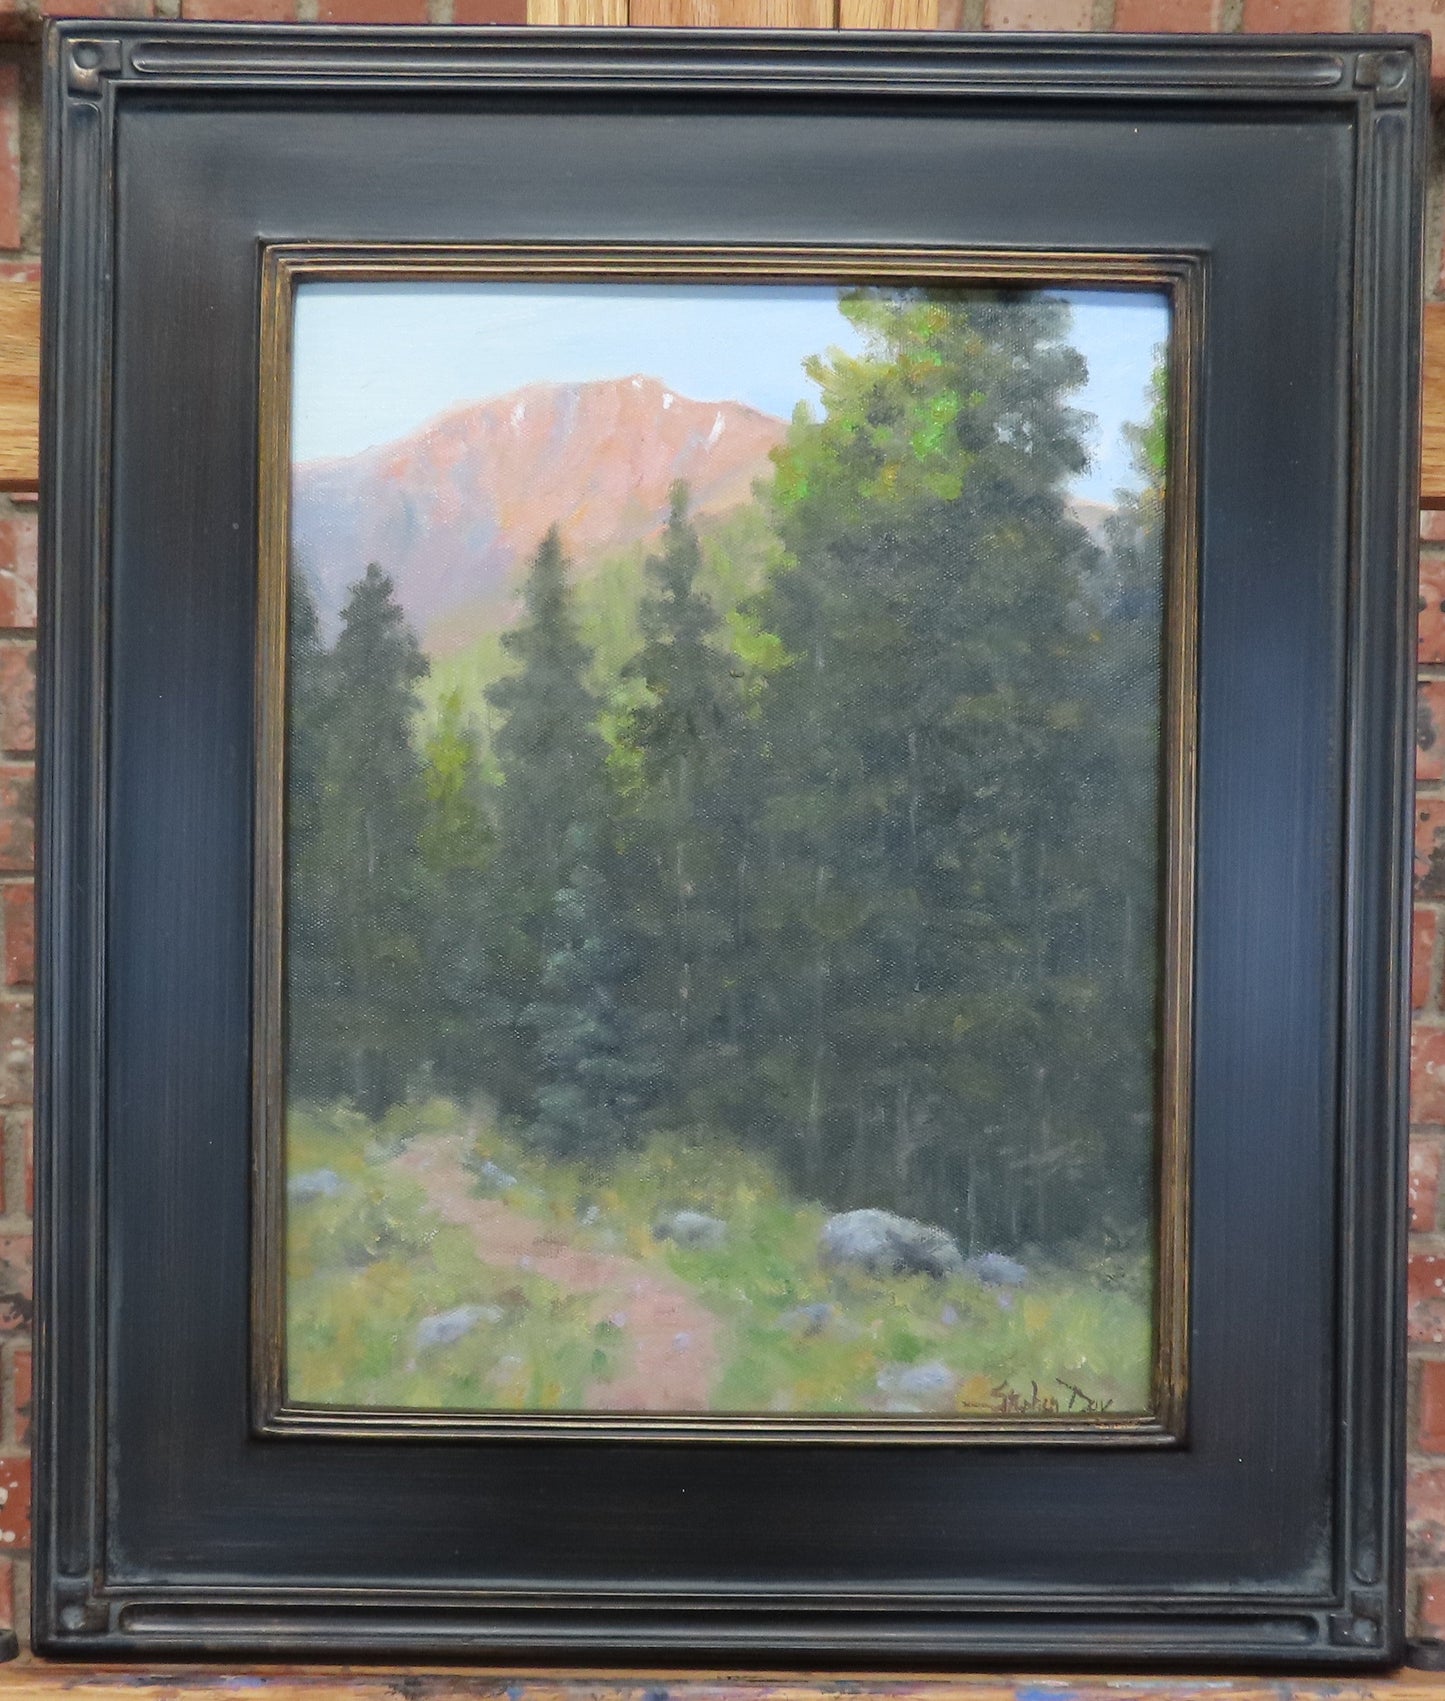 Mountain Morning-painting-Stephen Day-Sorrel Sky Gallery